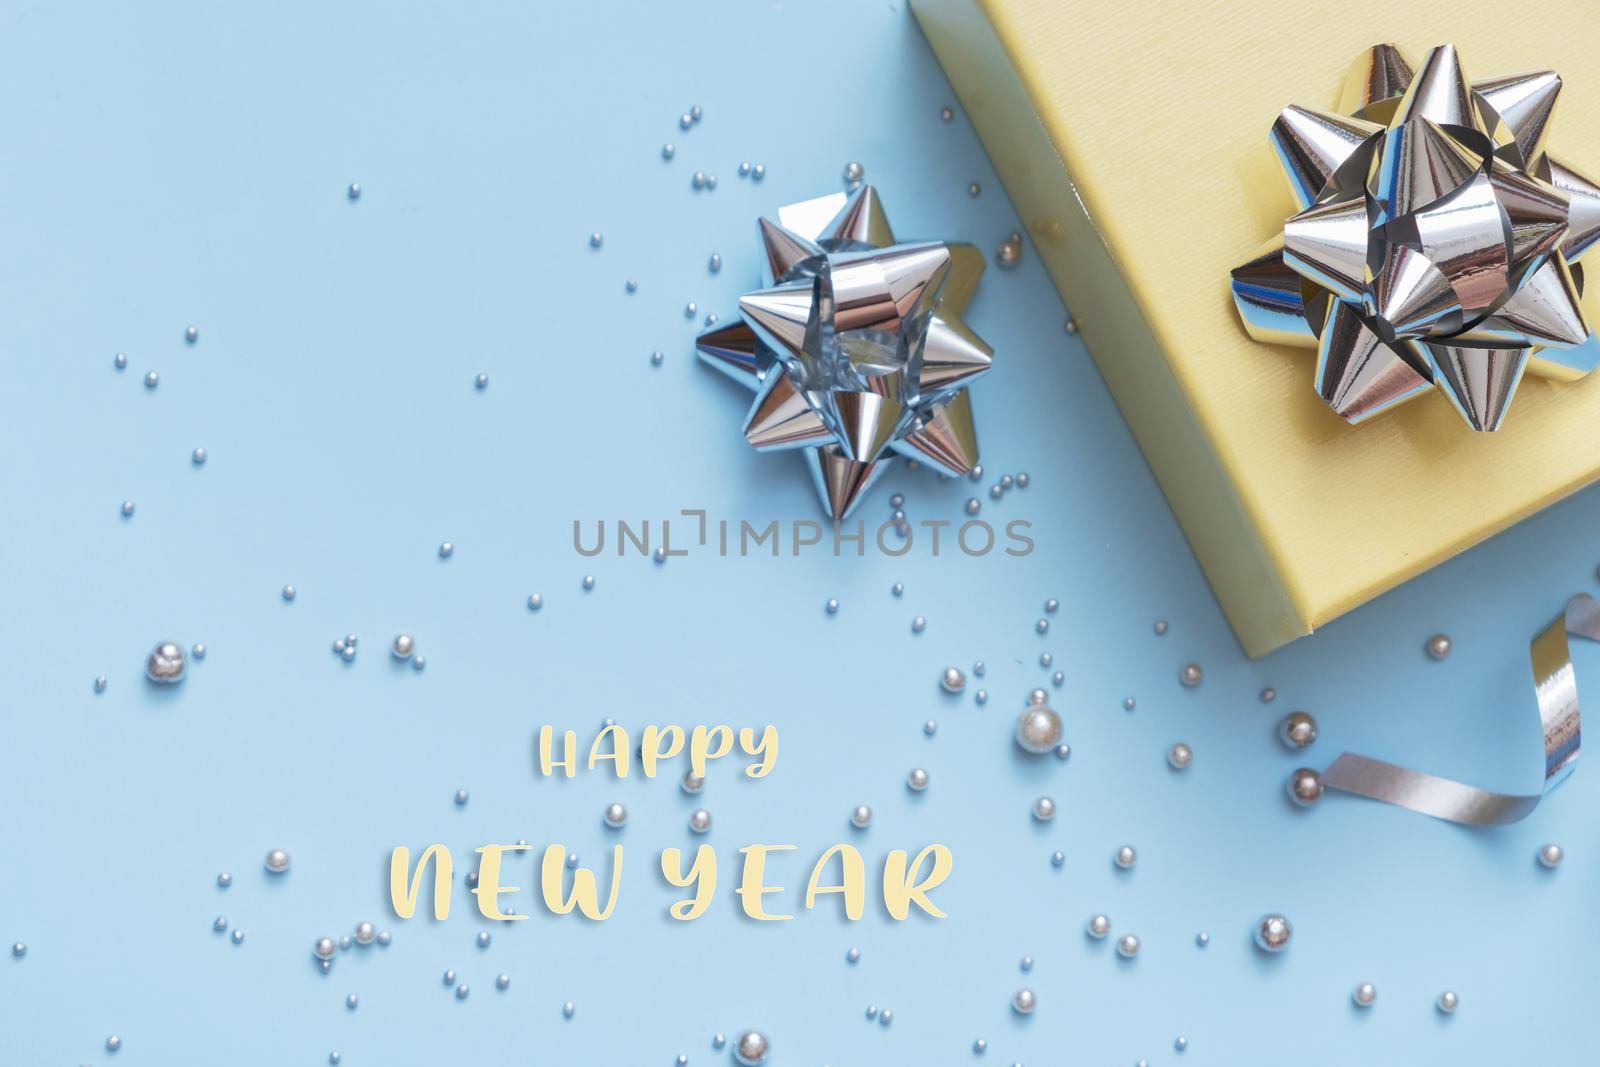 Happy New Year text with gift box, pearls and bows top view on festive blue background.